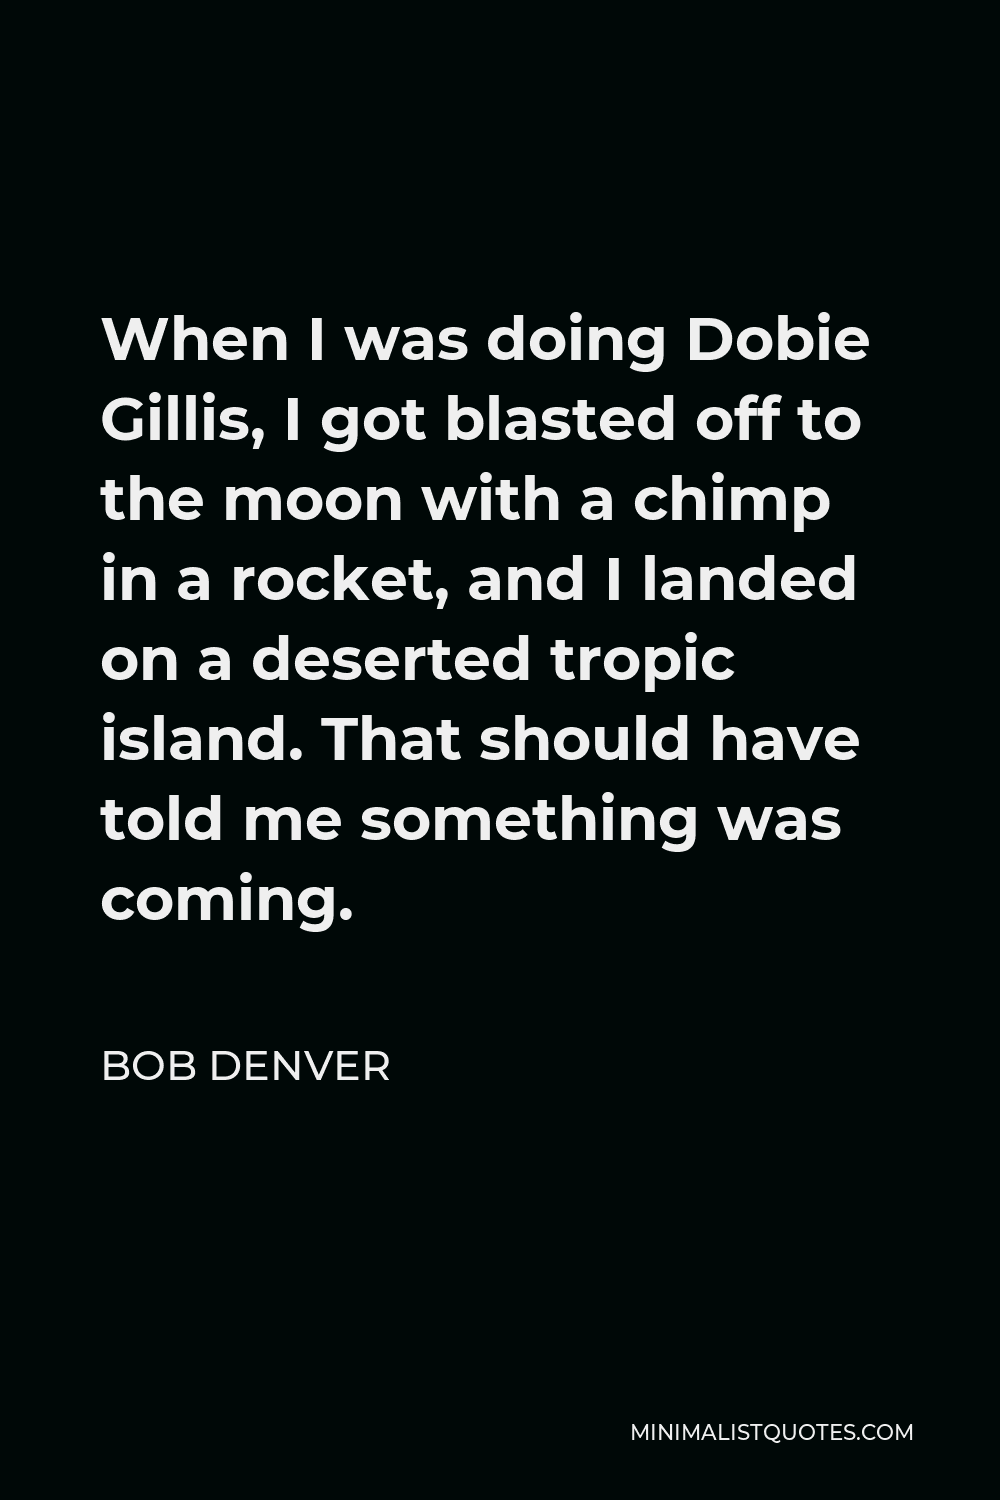 Bob Denver Quote - When I was doing Dobie Gillis, I got blasted off to the moon with a chimp in a rocket, and I landed on a deserted tropic island. That should have told me something was coming.